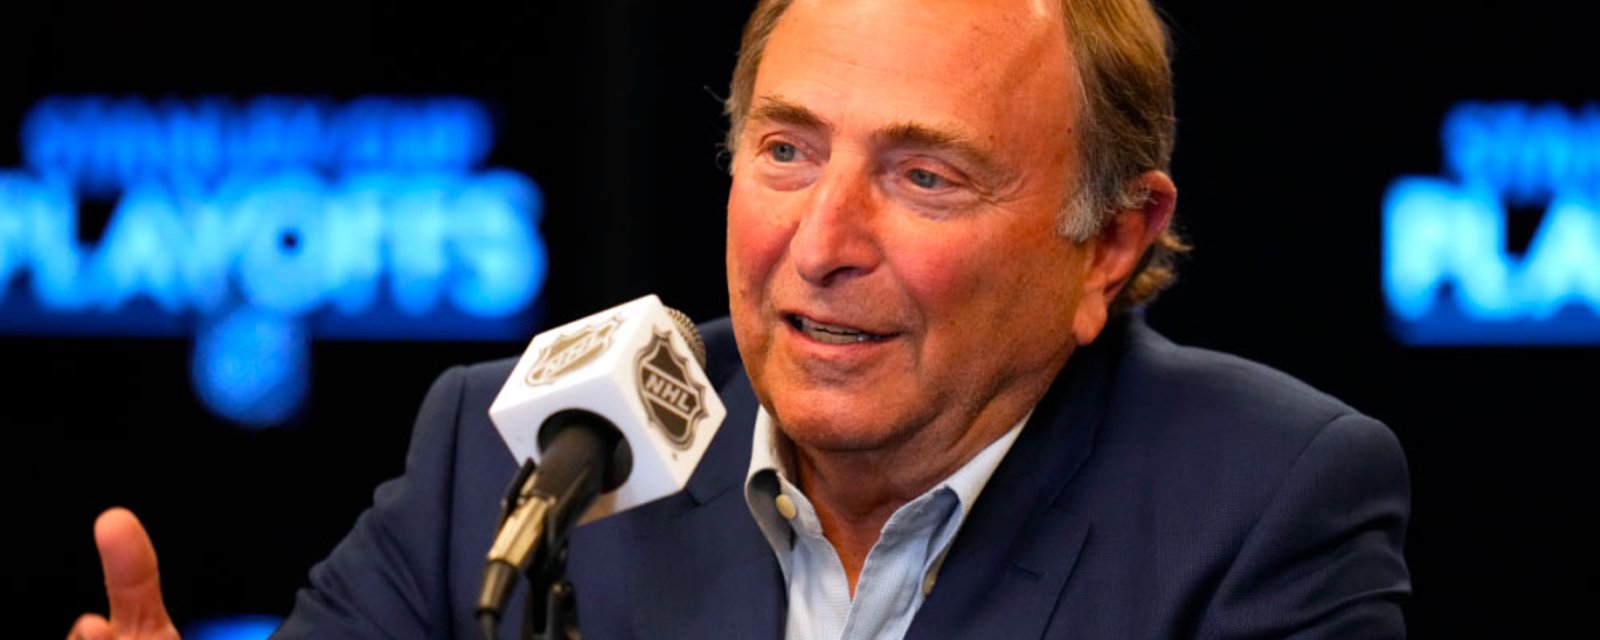 Report: NHL salary cap to rise by $4 million next season